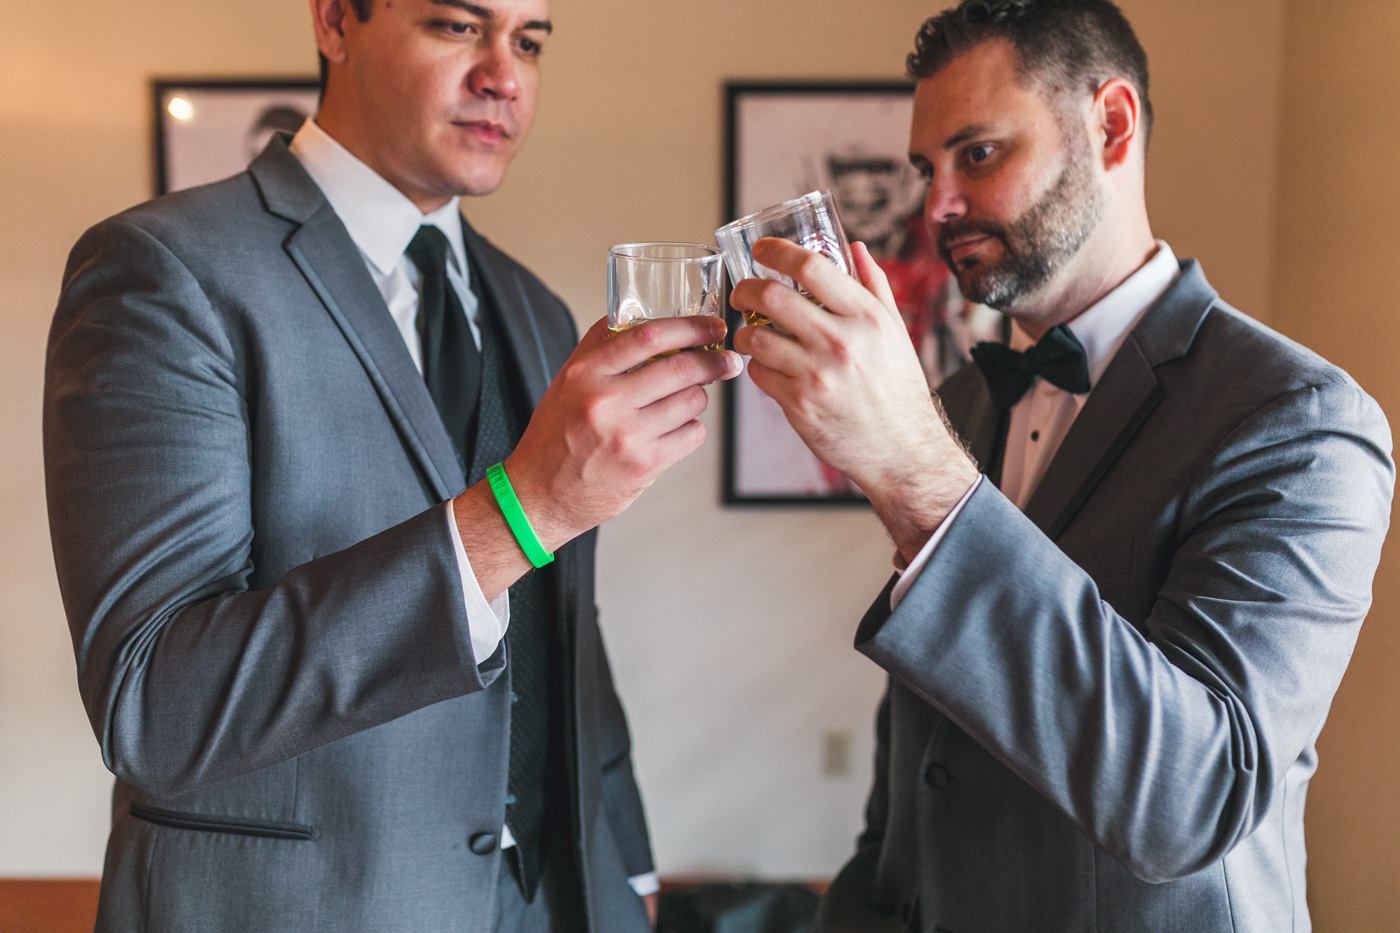 groom-and-best-man-share-drink